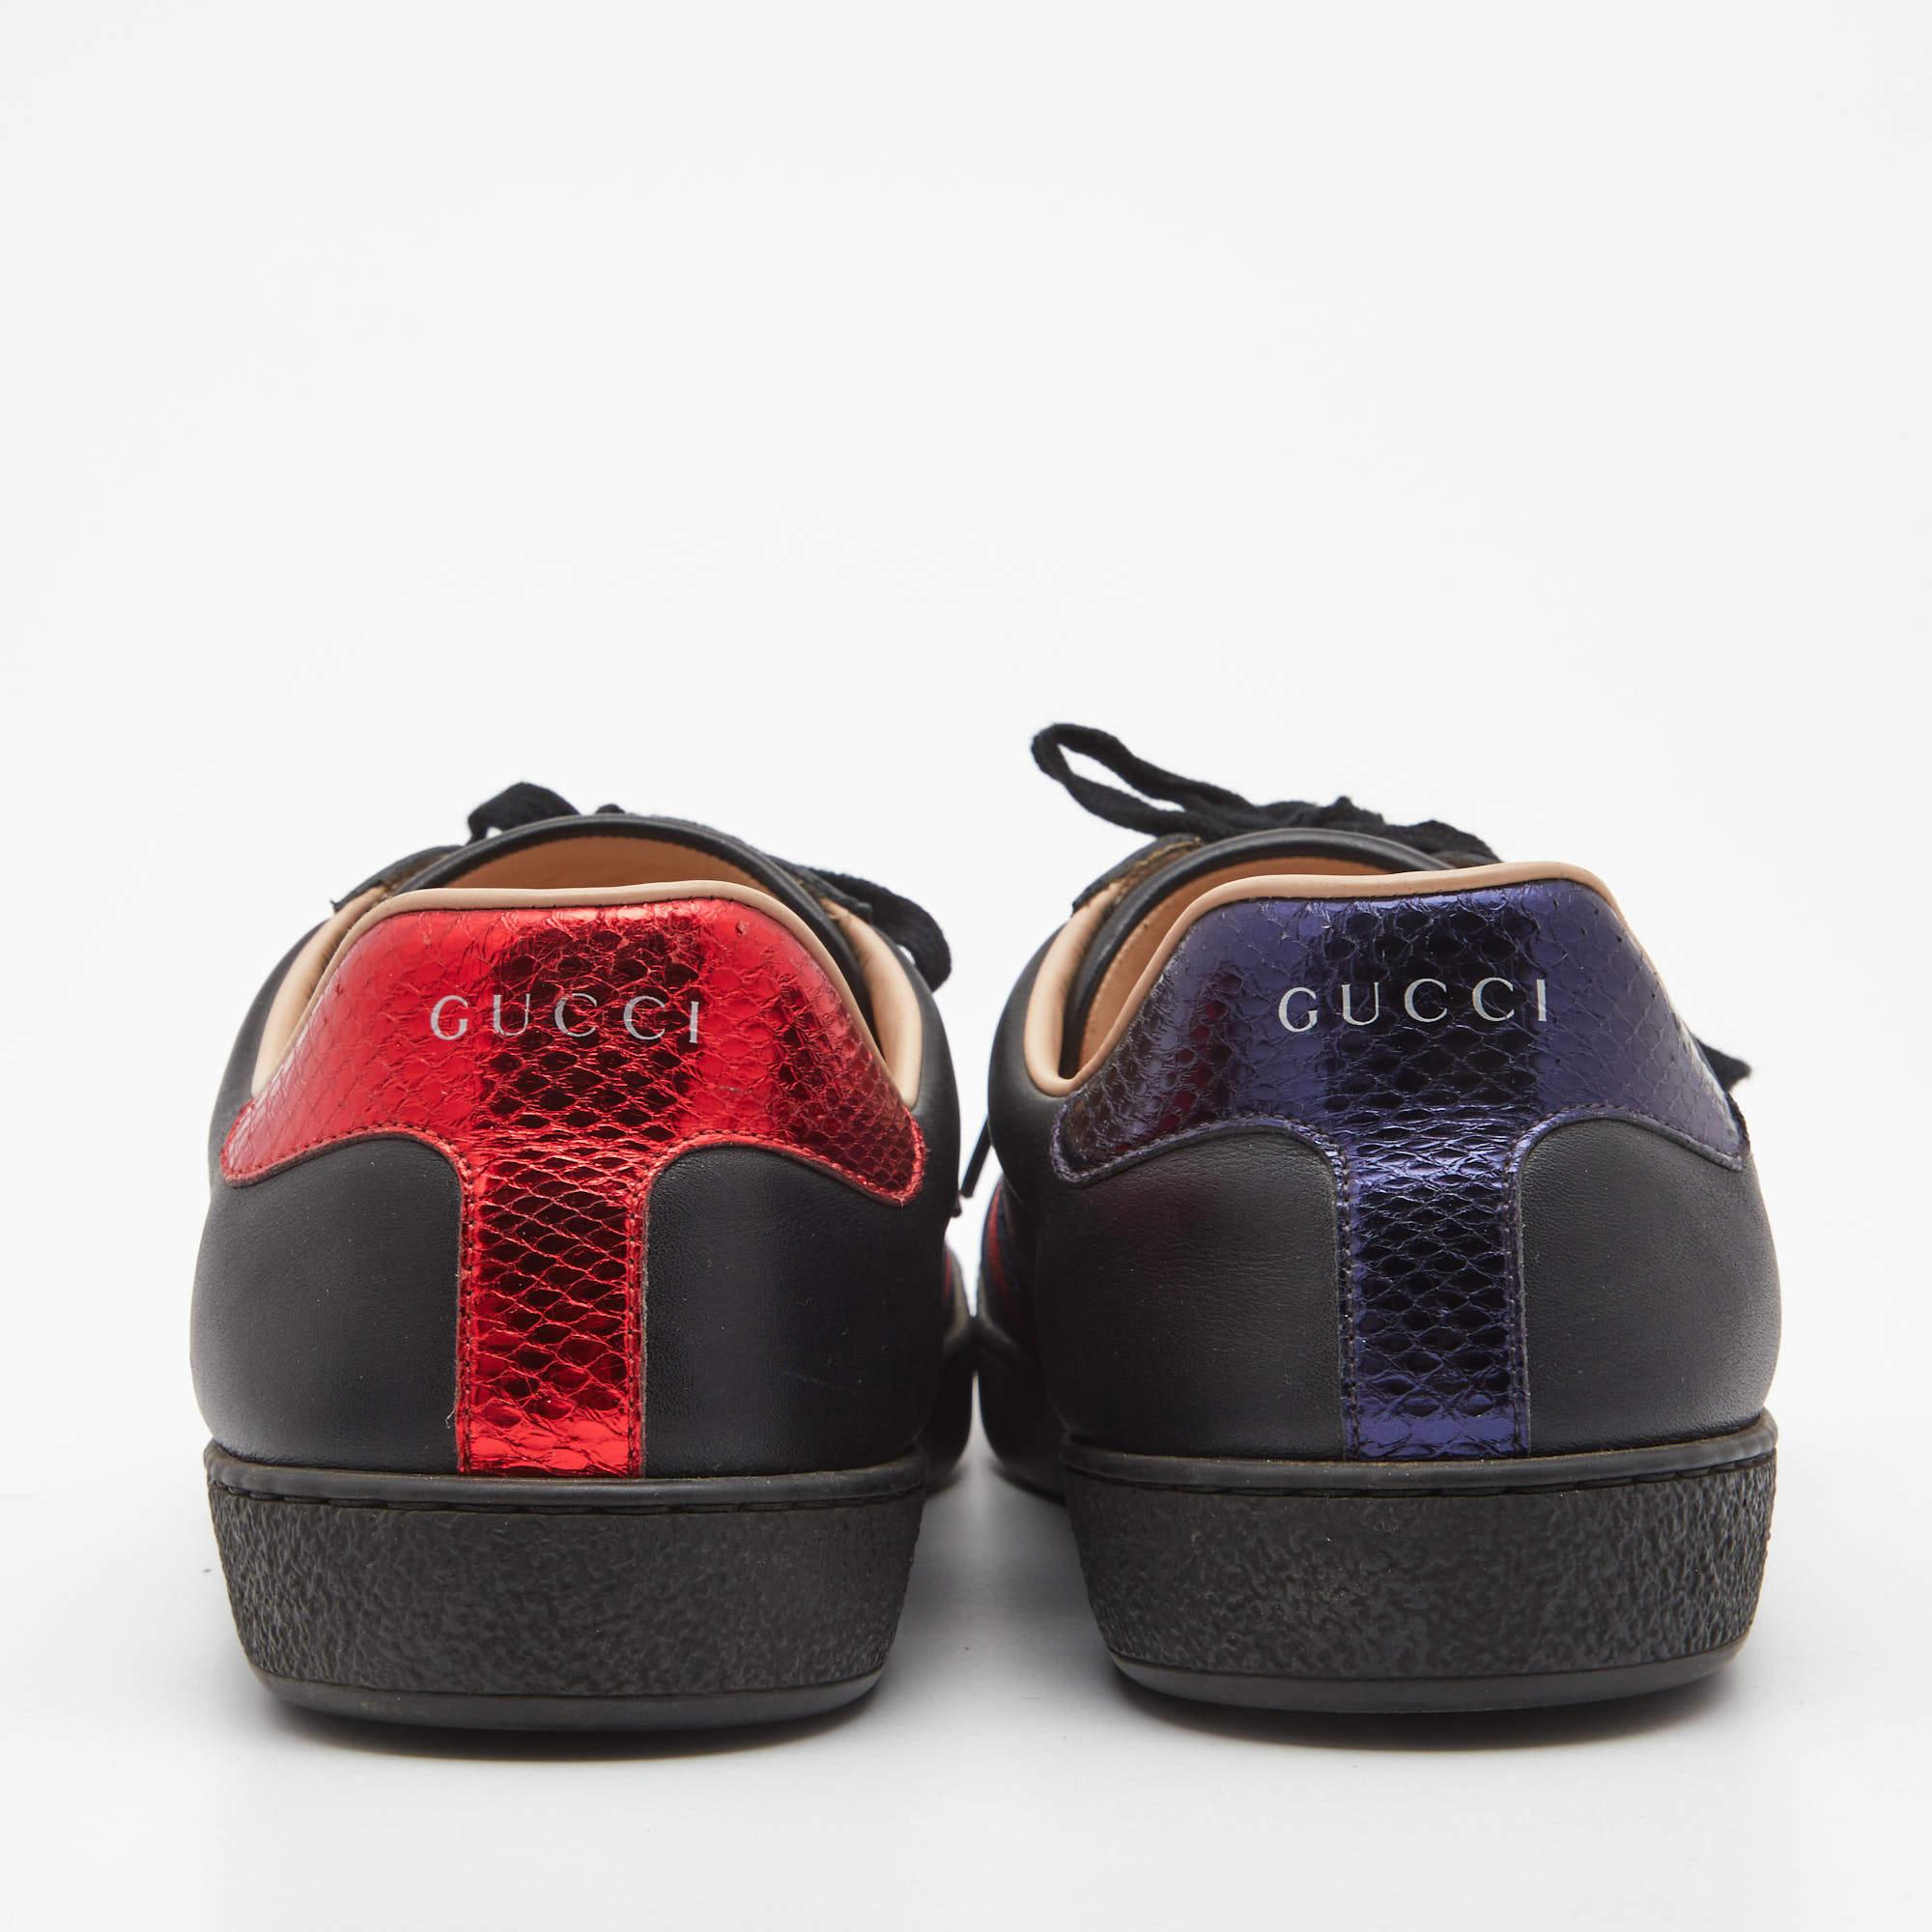 Gucci Black Leather Embroidered Bee Ace Sneakers Size 44 3